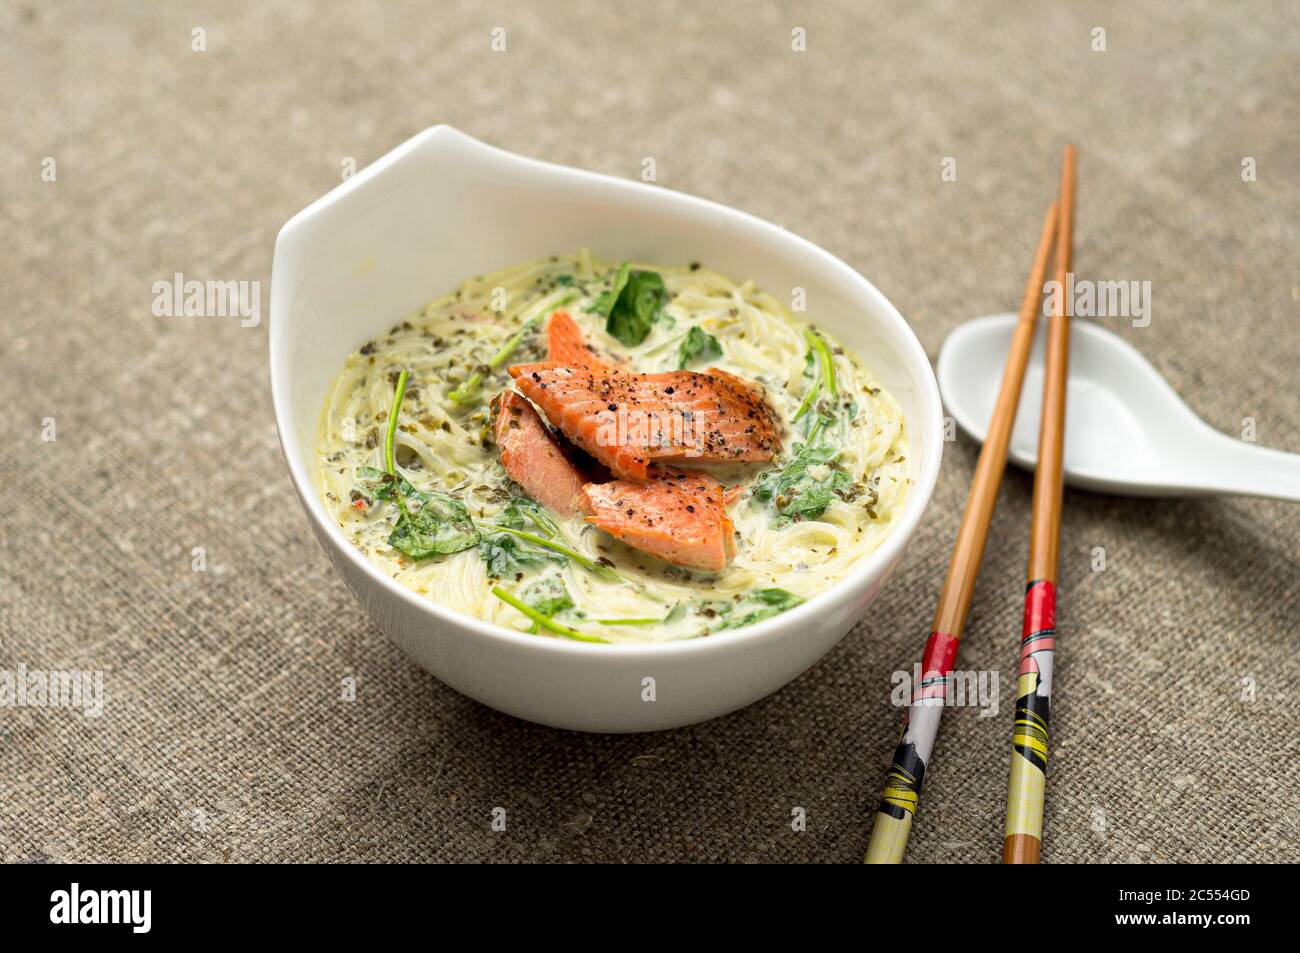 Tasty thai coconut soup with noodles. One of the most popular Thai food, tom kha is a spicy and sour soup with coconut milk. Vermicelli noodles and sa Stock Photo